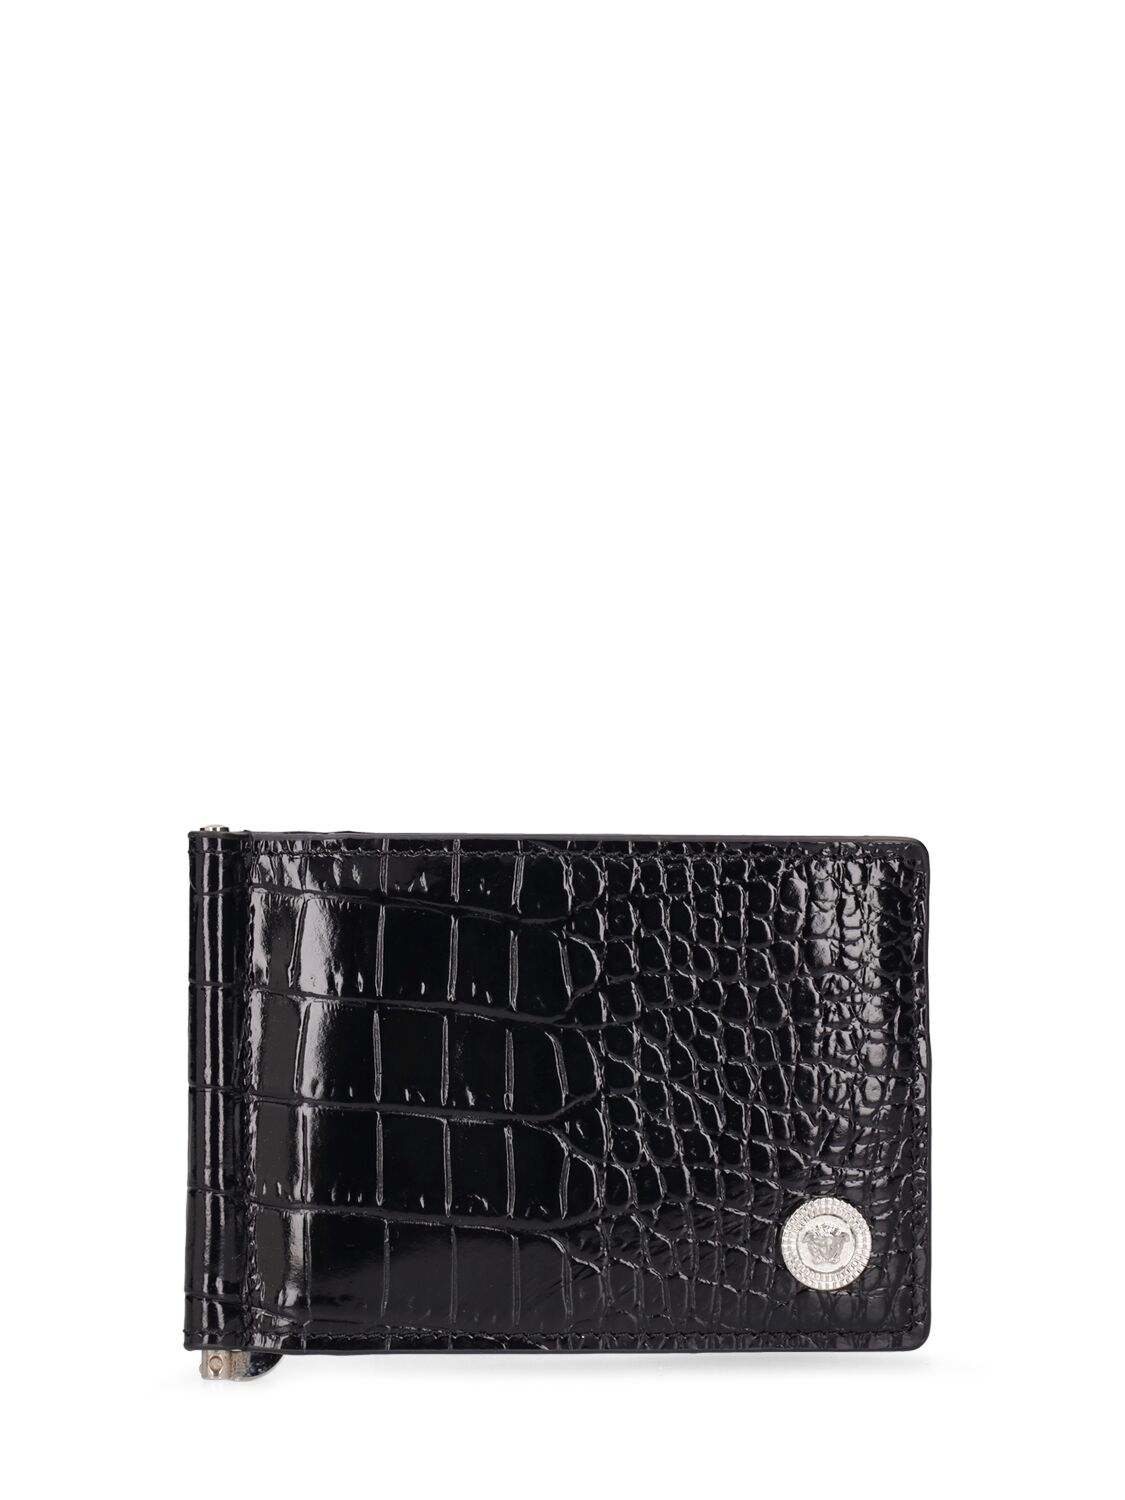 Image of Croc Embossed Leather Wallet